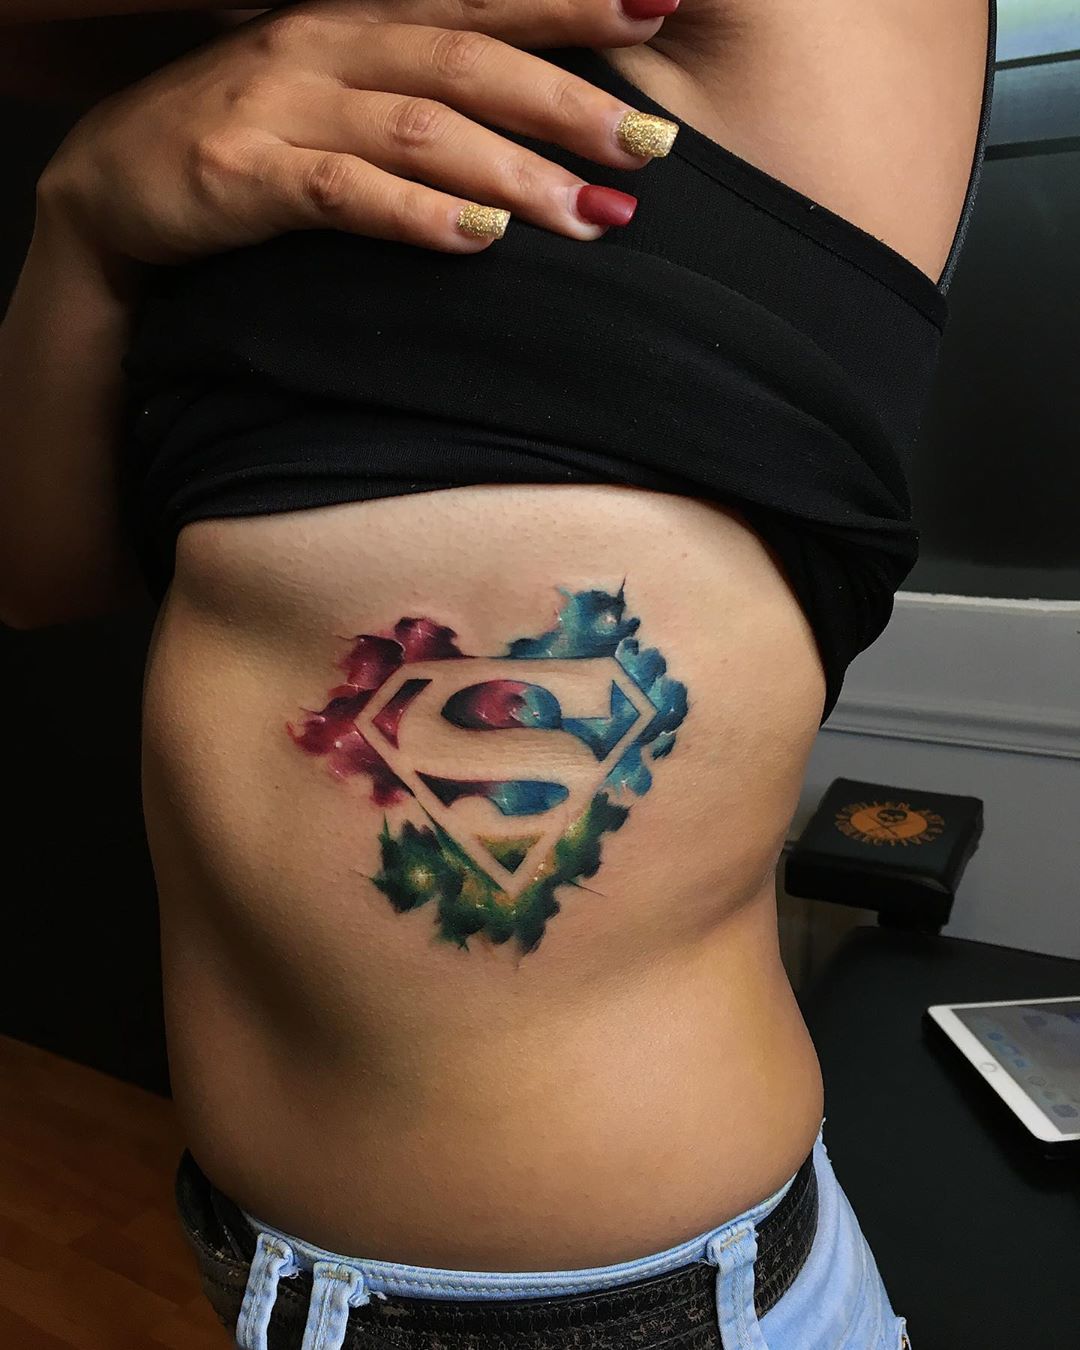 Memorial Tattoo - Name that anime! #coredrill by... | Facebook